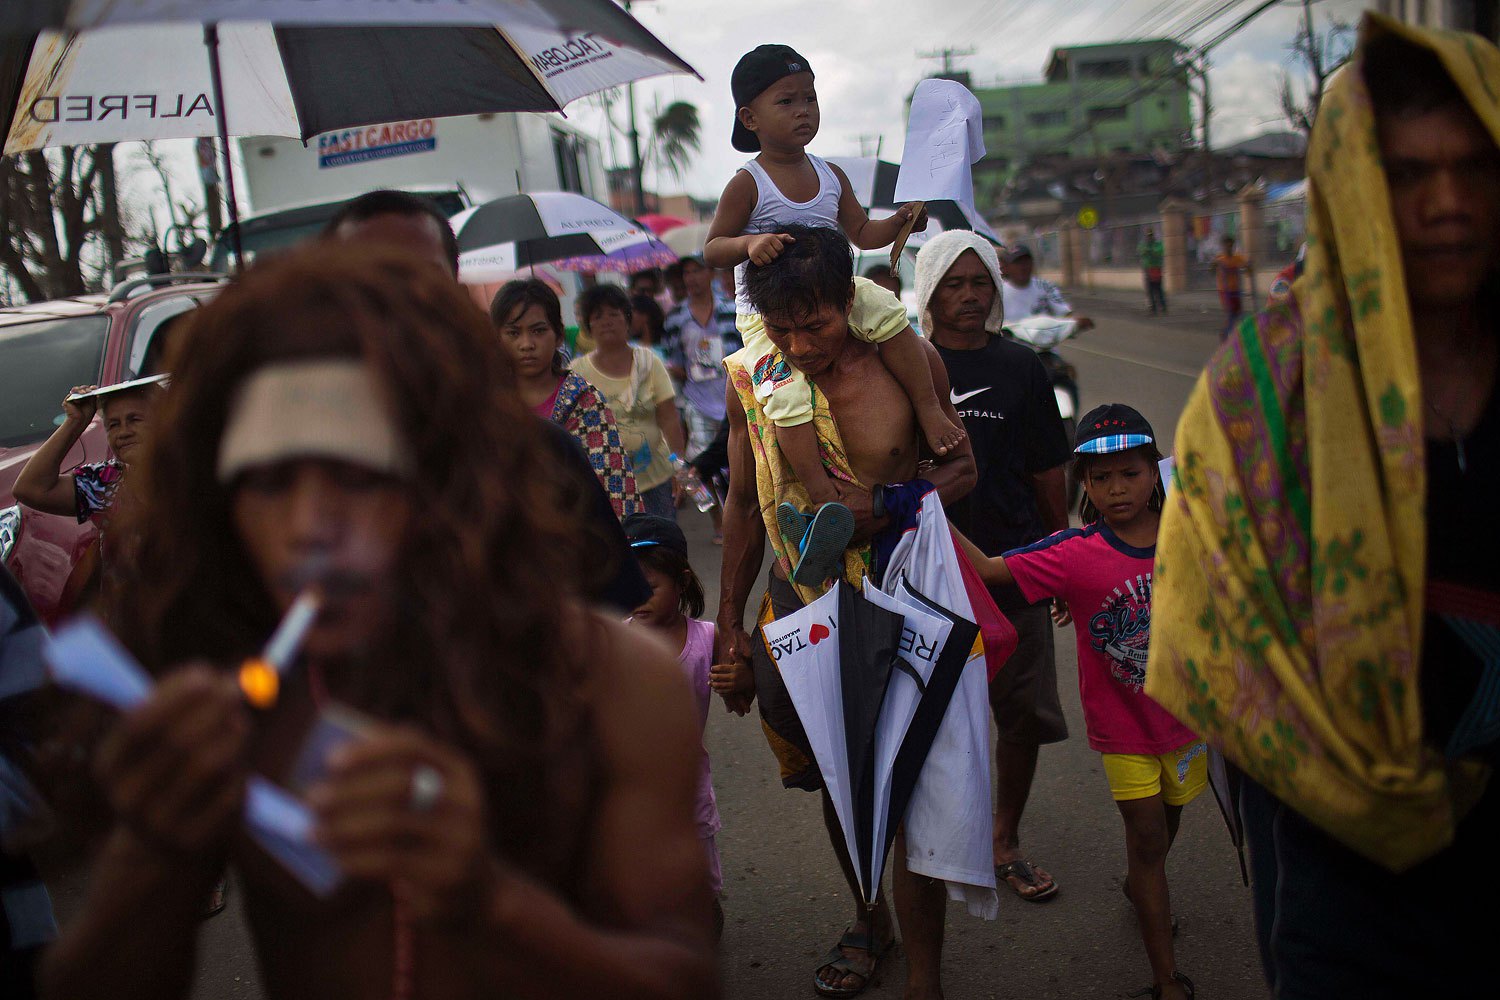 People march in the rain Tacloban, Philippines during a procession to call for courage and resilience among their Typhoon Haiyan survivors on November 19, 2013.